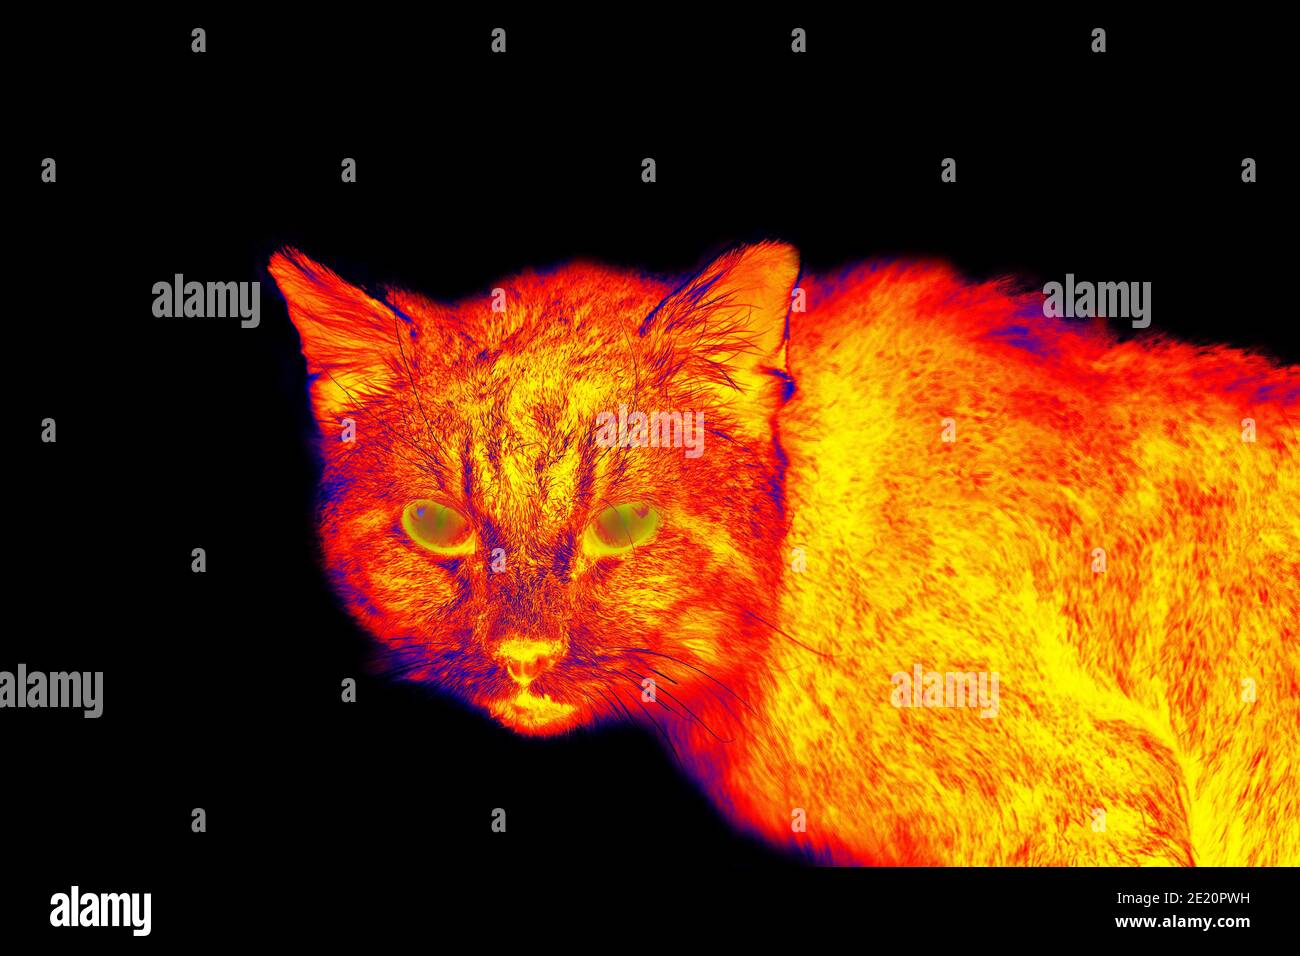 Wild stray cat in scientific high-tech thermal imager on black background isolated Stock Photo